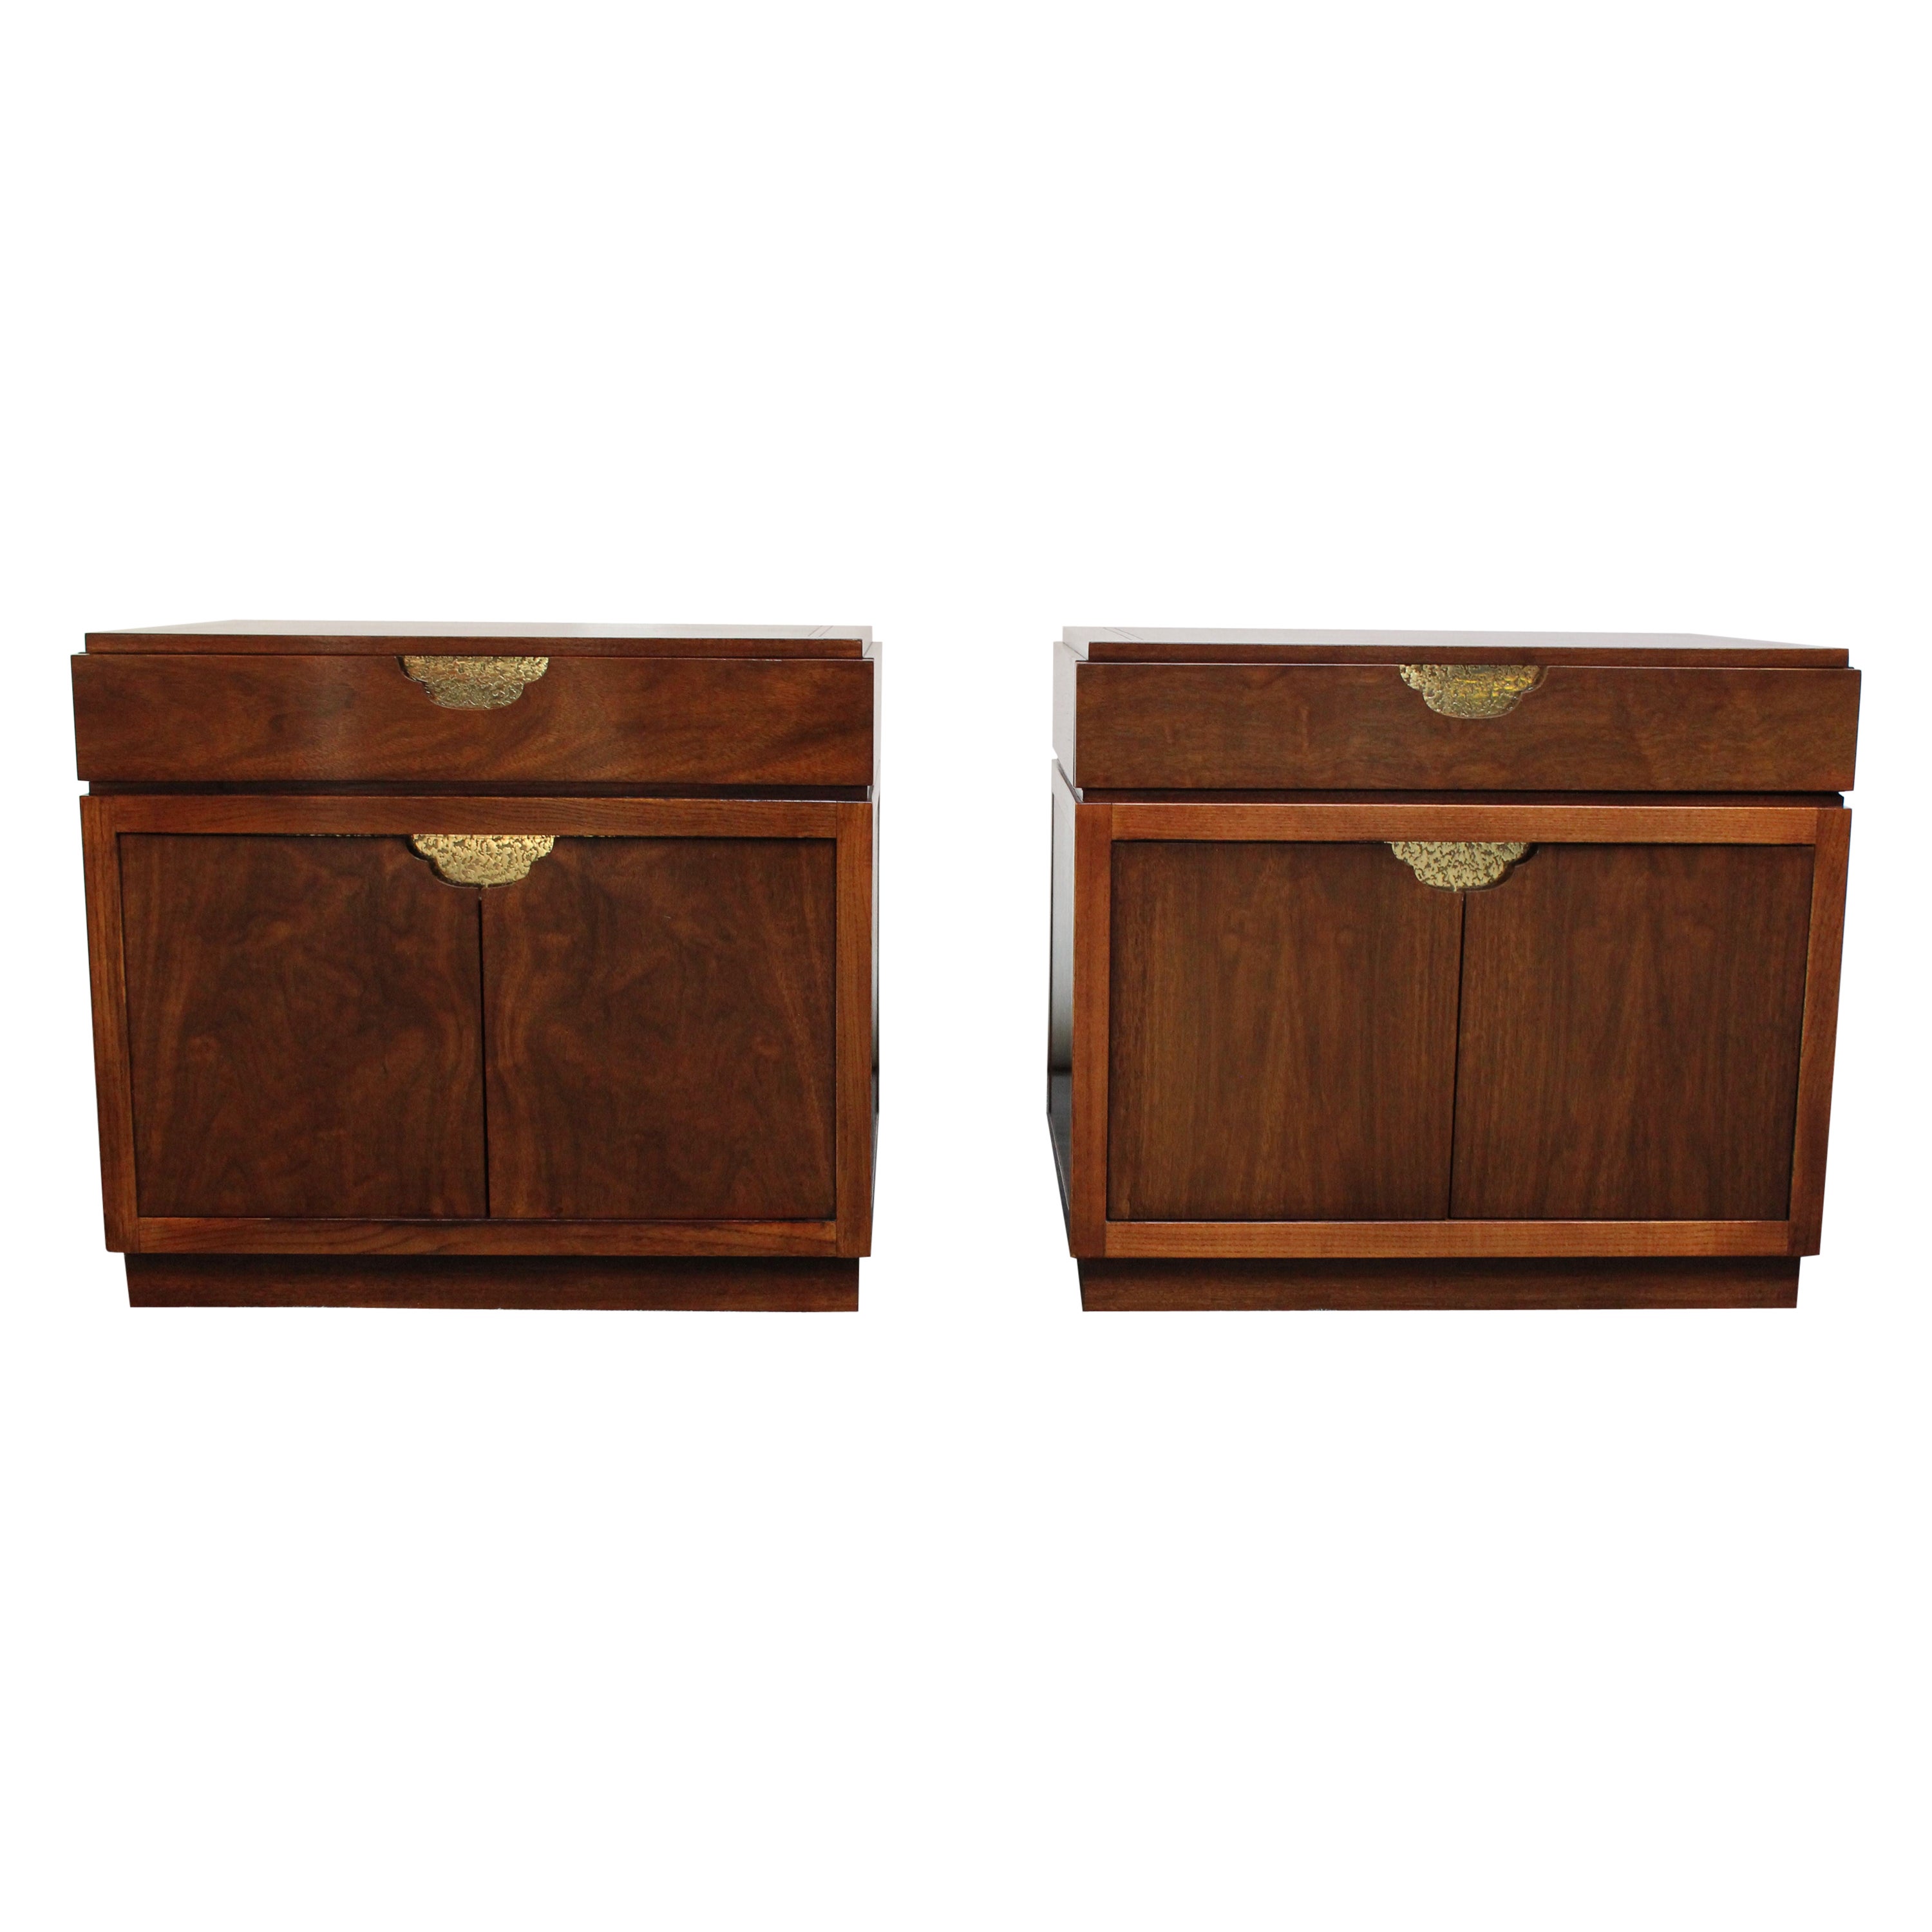 Pair of Vintage Walnut and Brass Nightstands by Baker